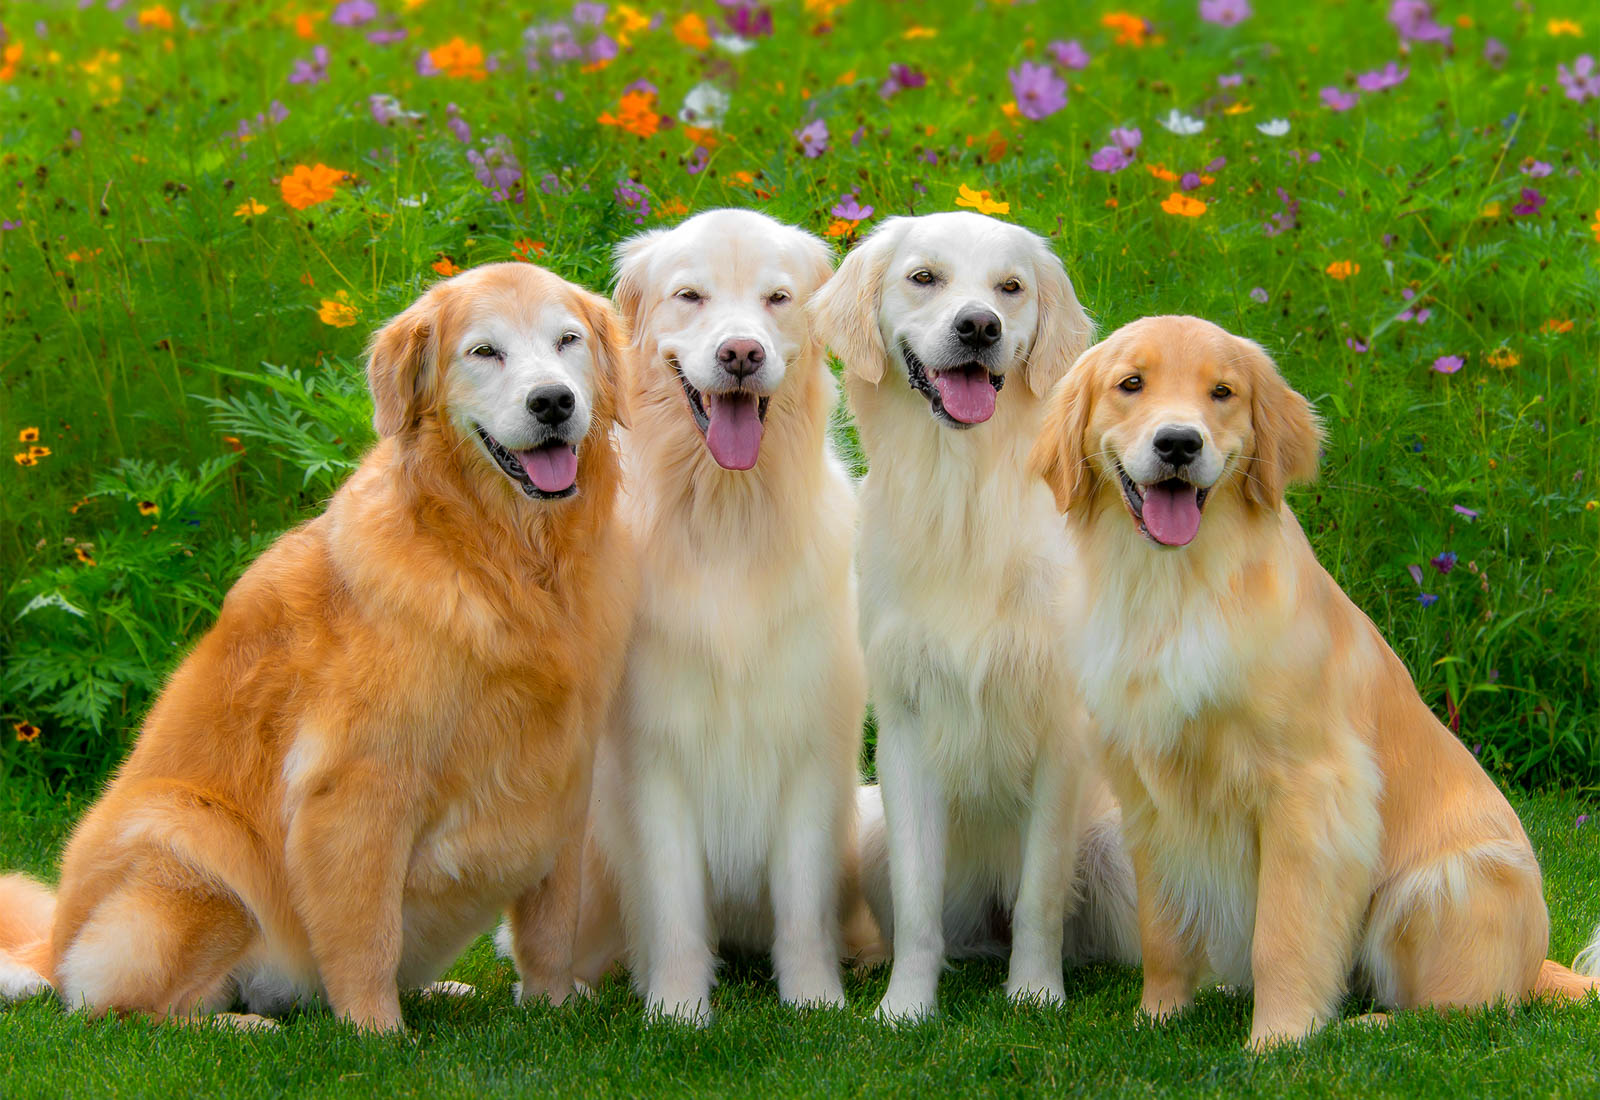 Four golden retrievers Smiling in front of flowers